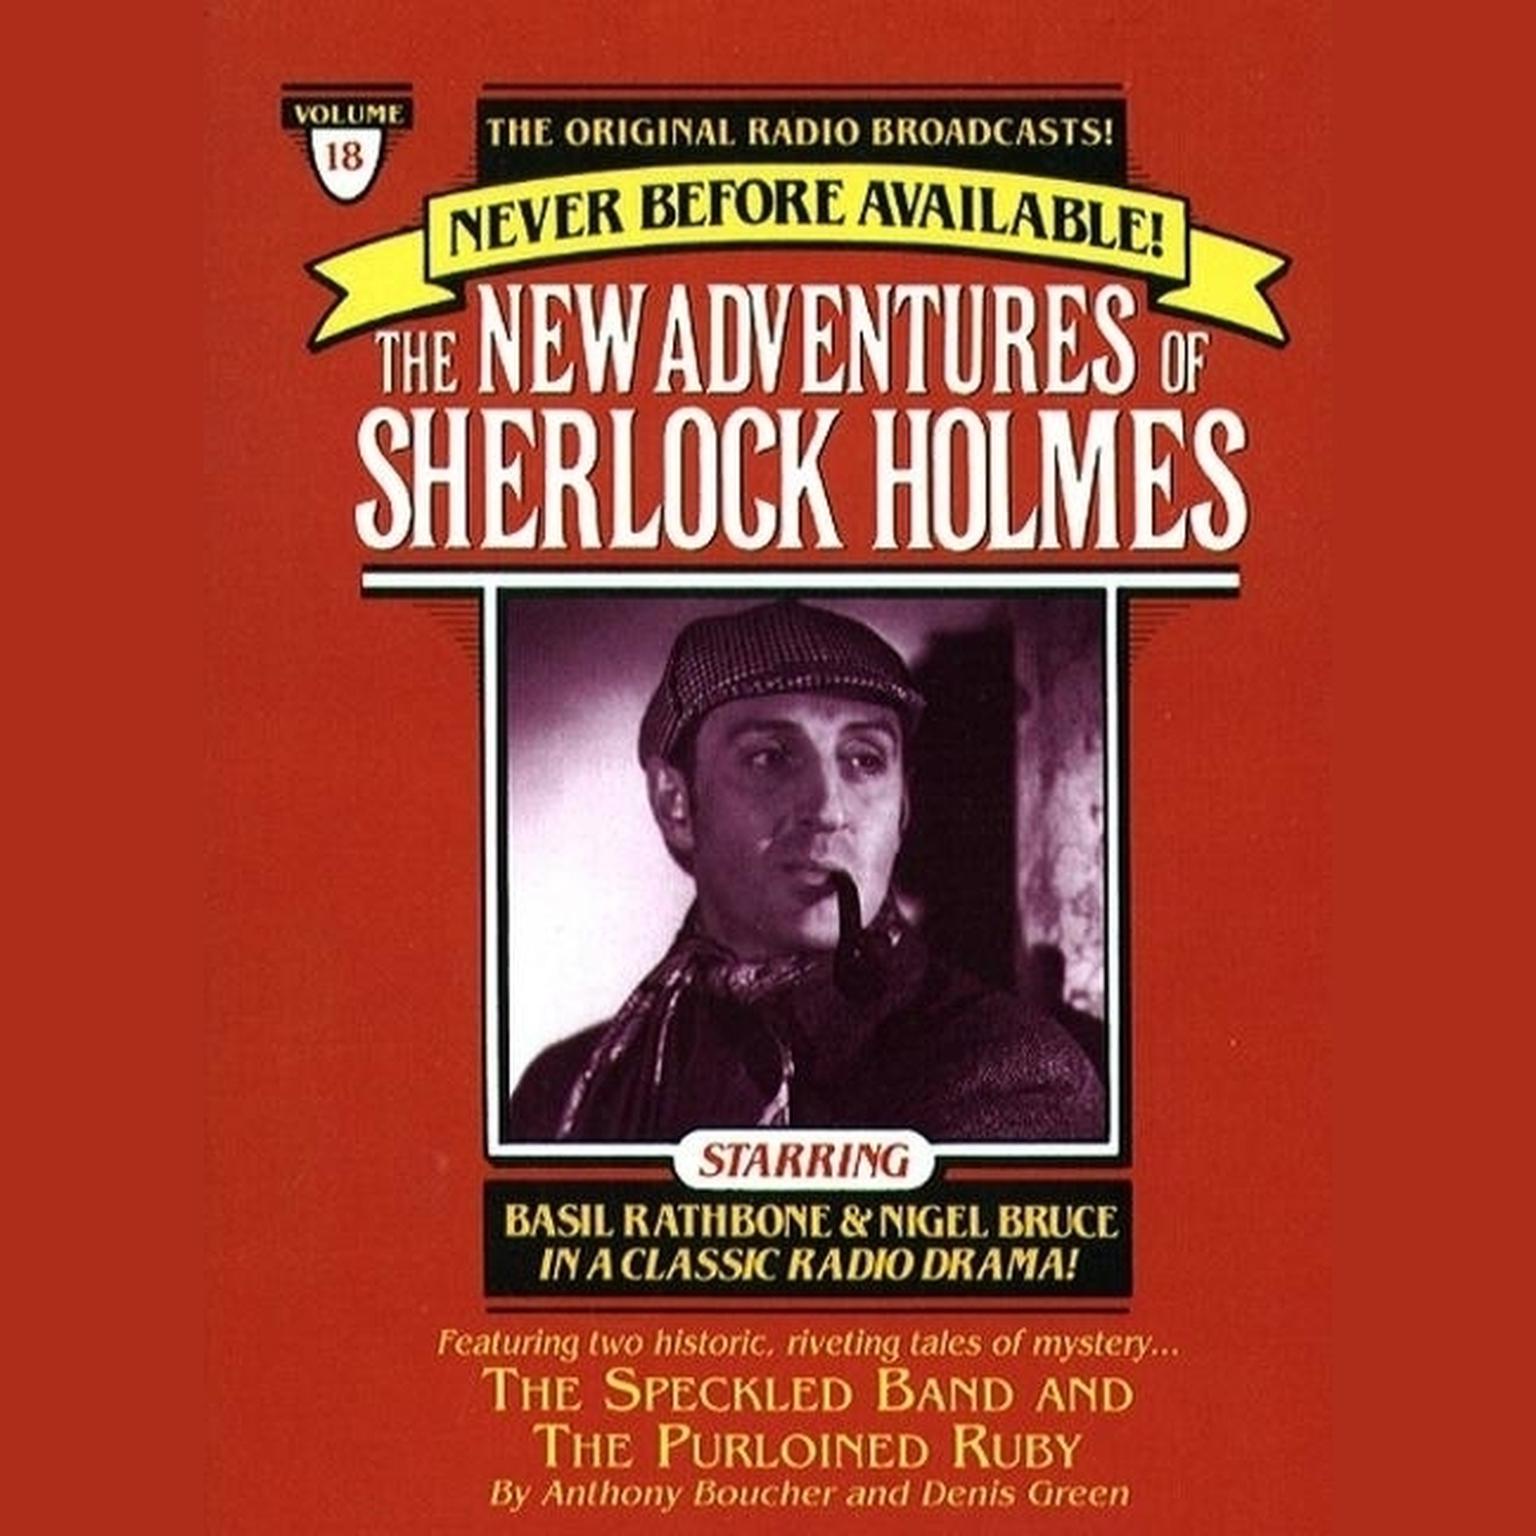 The Speckled Band and The Purloined Ruby (Abridged): The New Adventures of Sherlock Holmes, Episode 18 Audiobook, by Anthony Boucher